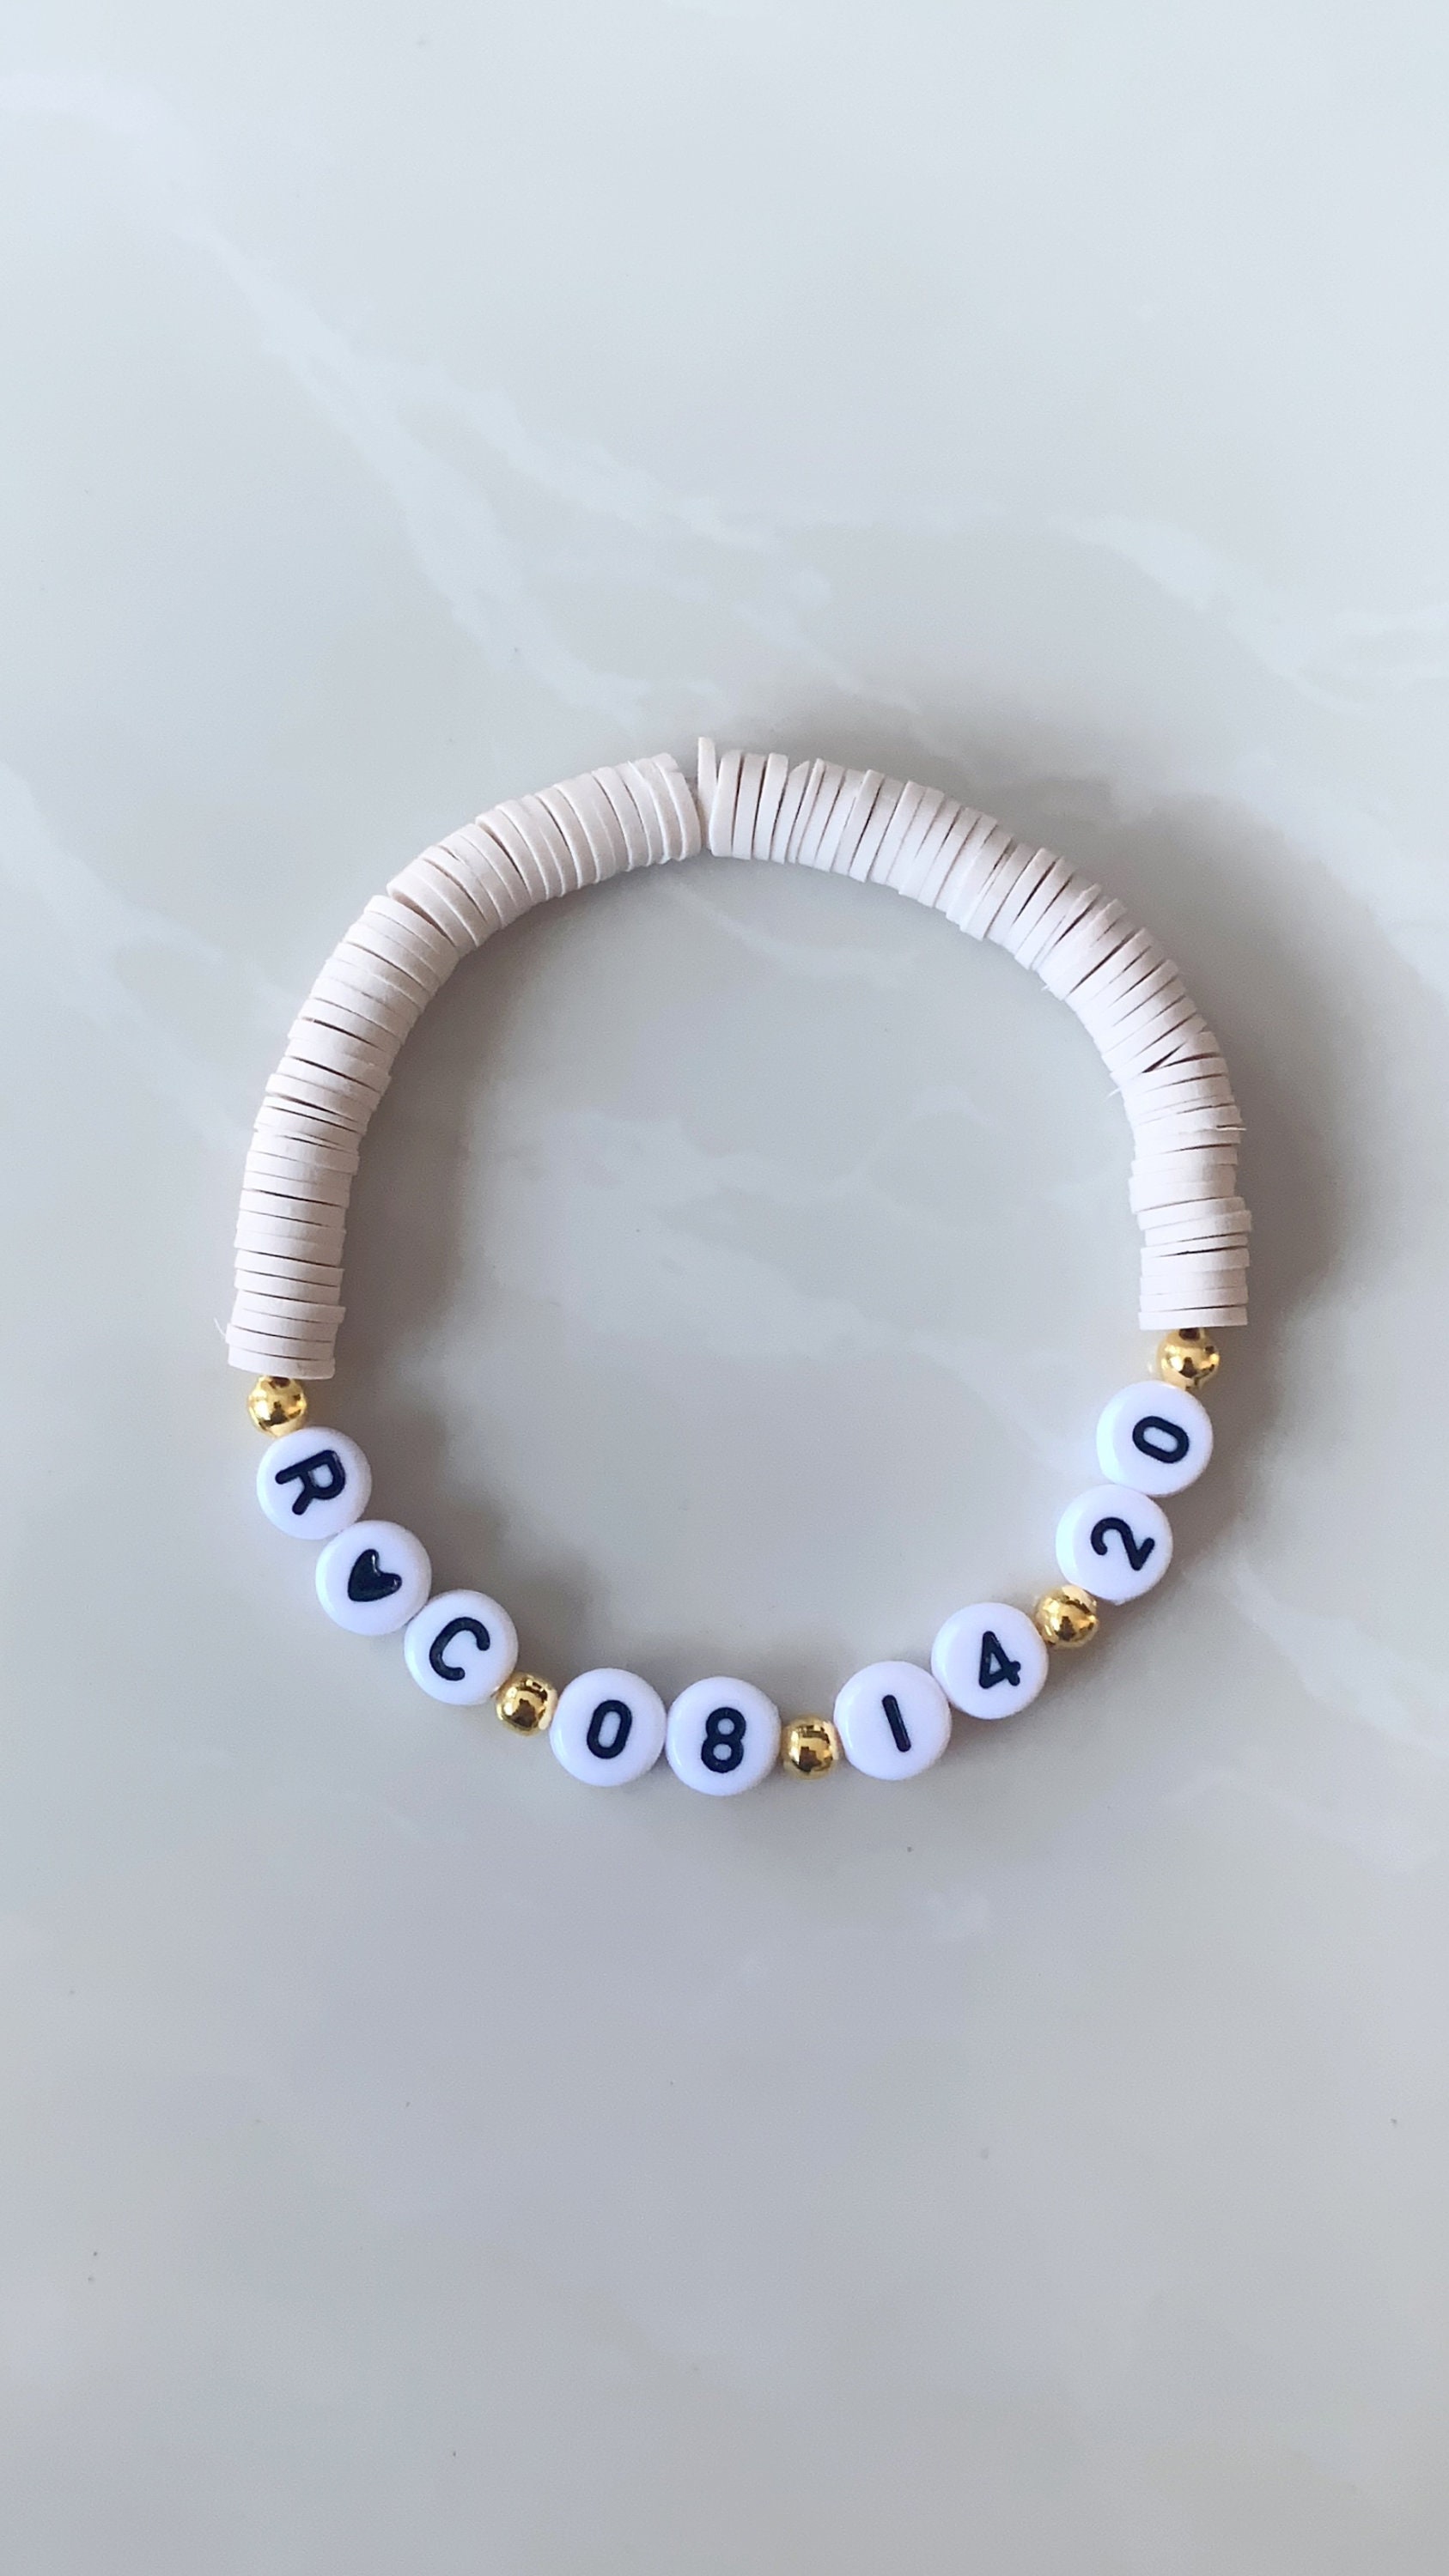 Personalized Letter Heishi Clay Bead Bracelet Custom Friendship Name  Initial Date Word Bracelet DIY Gift for Him Her Couples Matching 